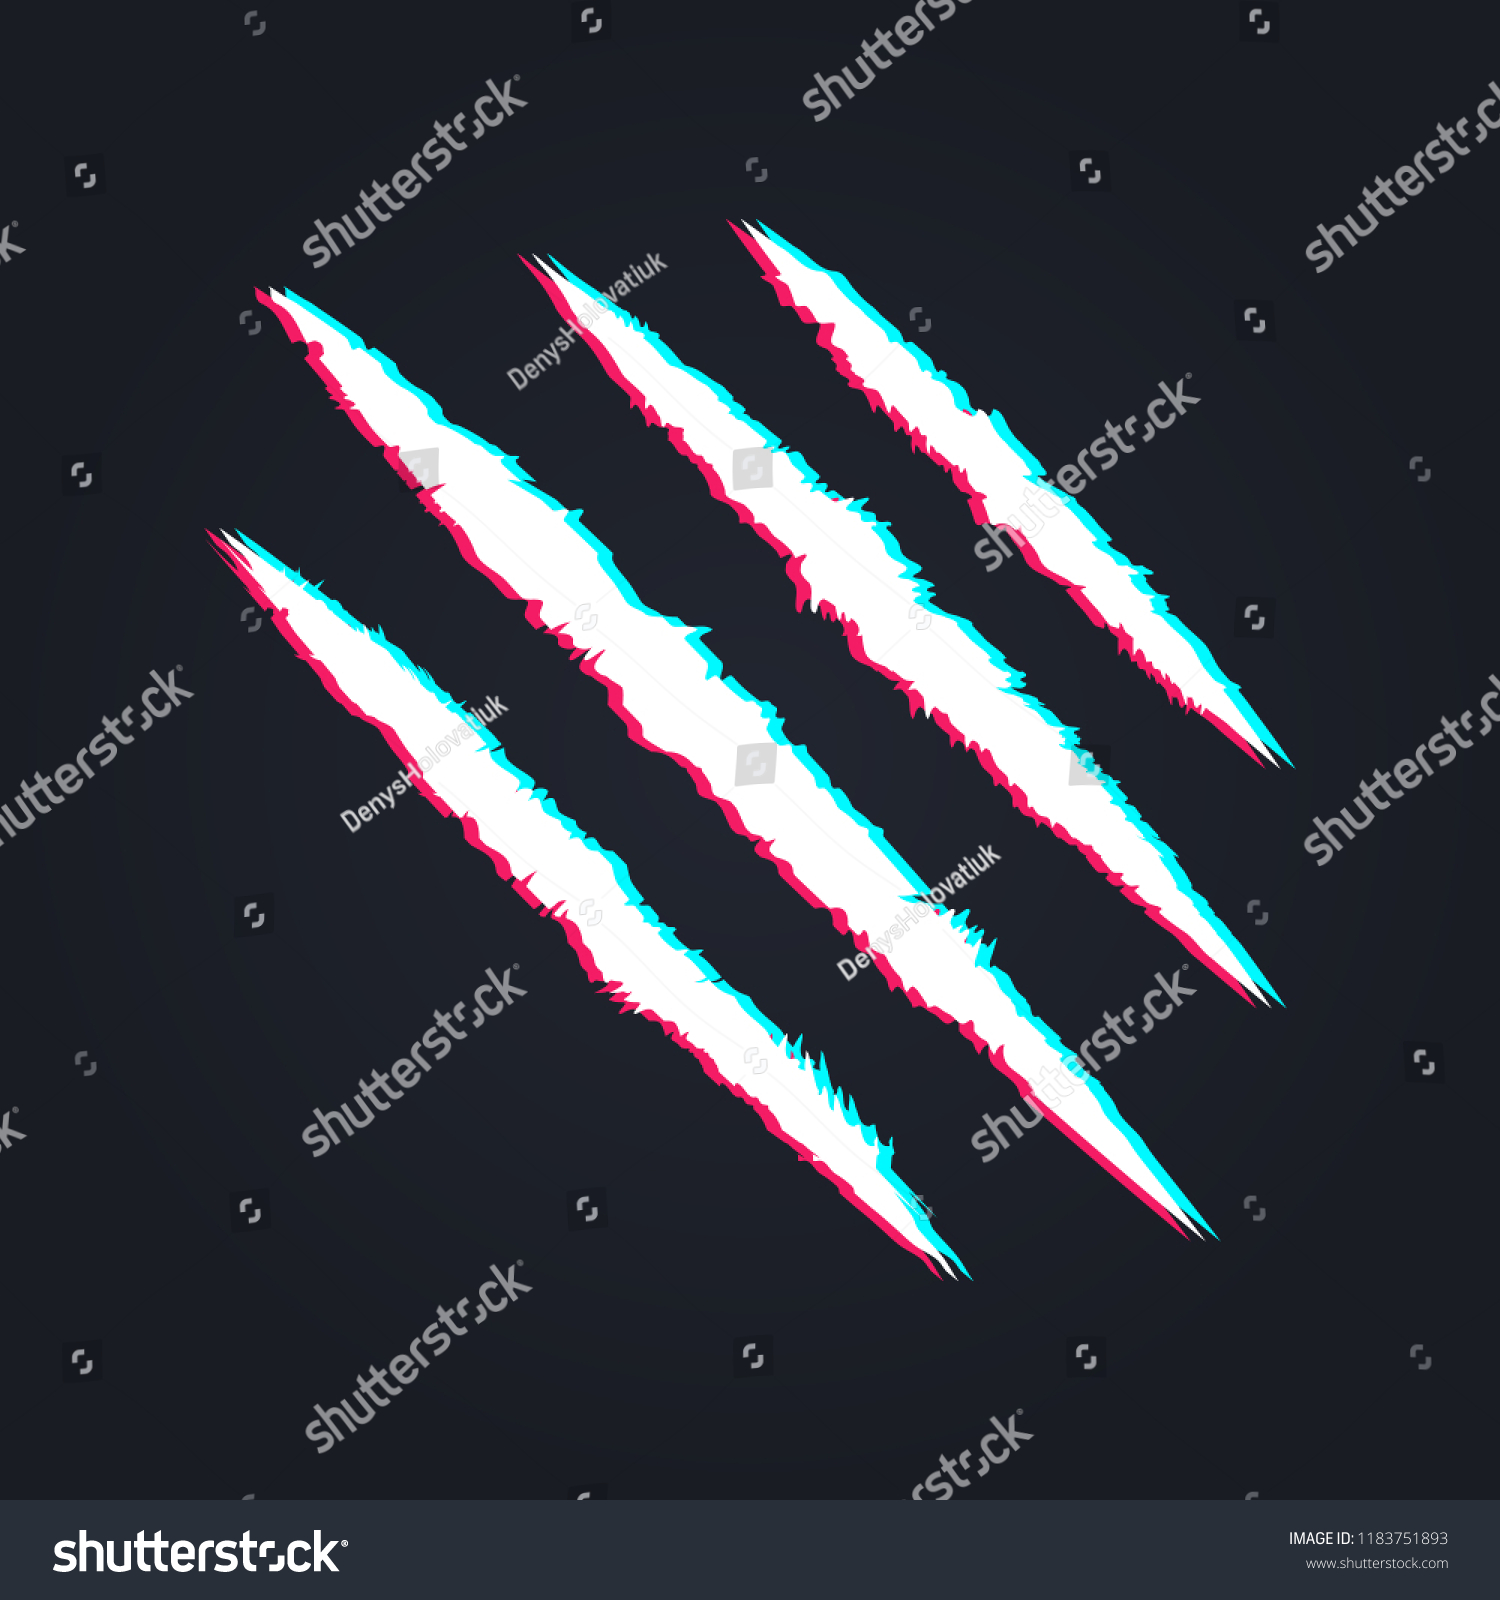 Scratch Claws Animal Distorted Glitch Style Stock Vector Royalty Free 1183751893 - roblox shirt glitch